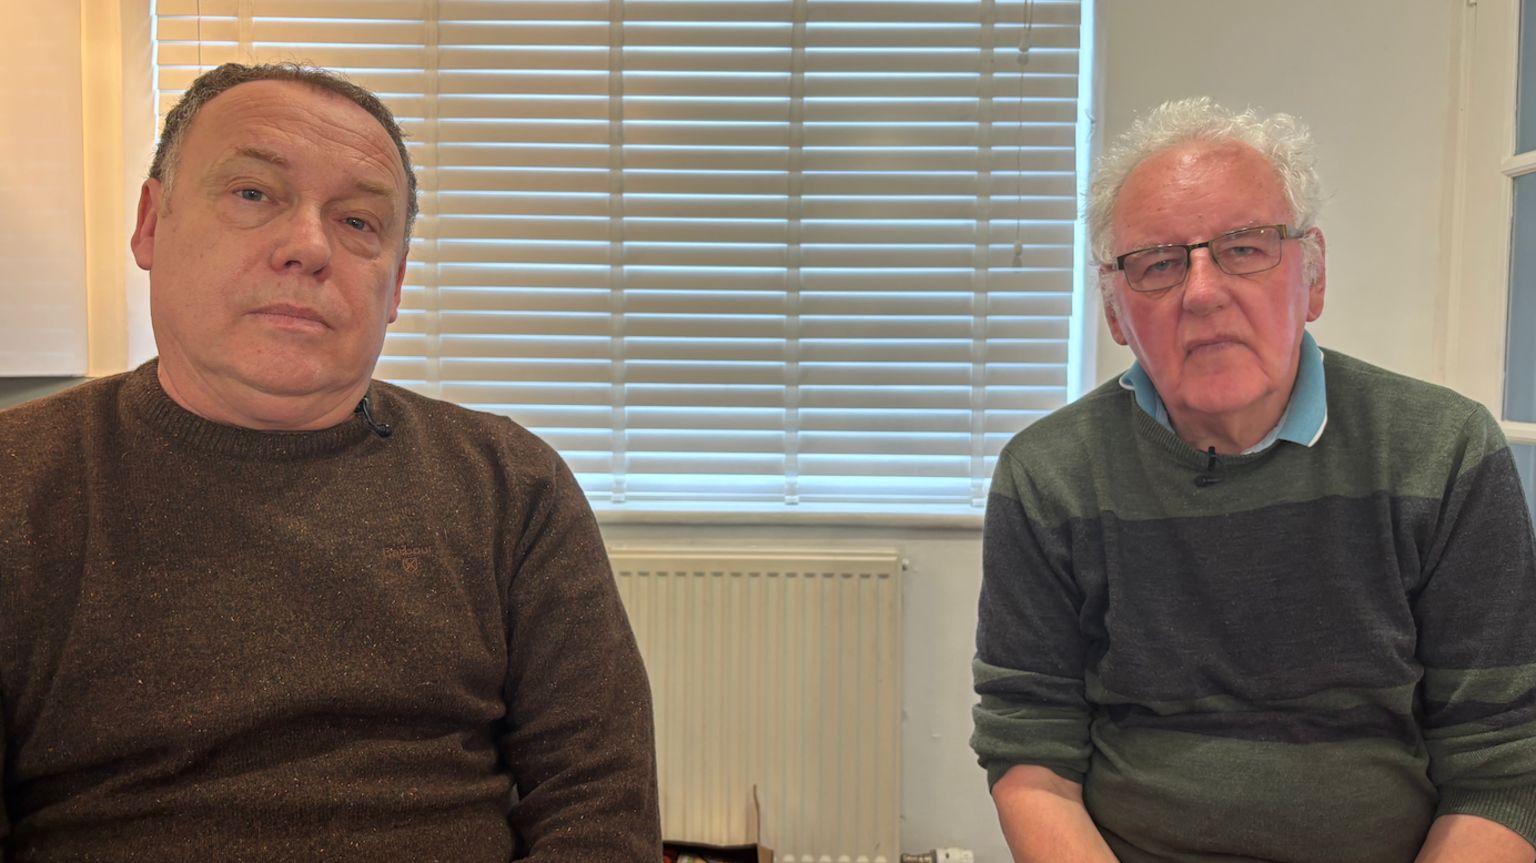 Sion Tecwyn sat on left wearing brown sweater, with Noel on the right in green sweater with blue collared polo shirt, both sat in front of a window with blinds shut at Noel's home at Gaerwen,  Anglesey